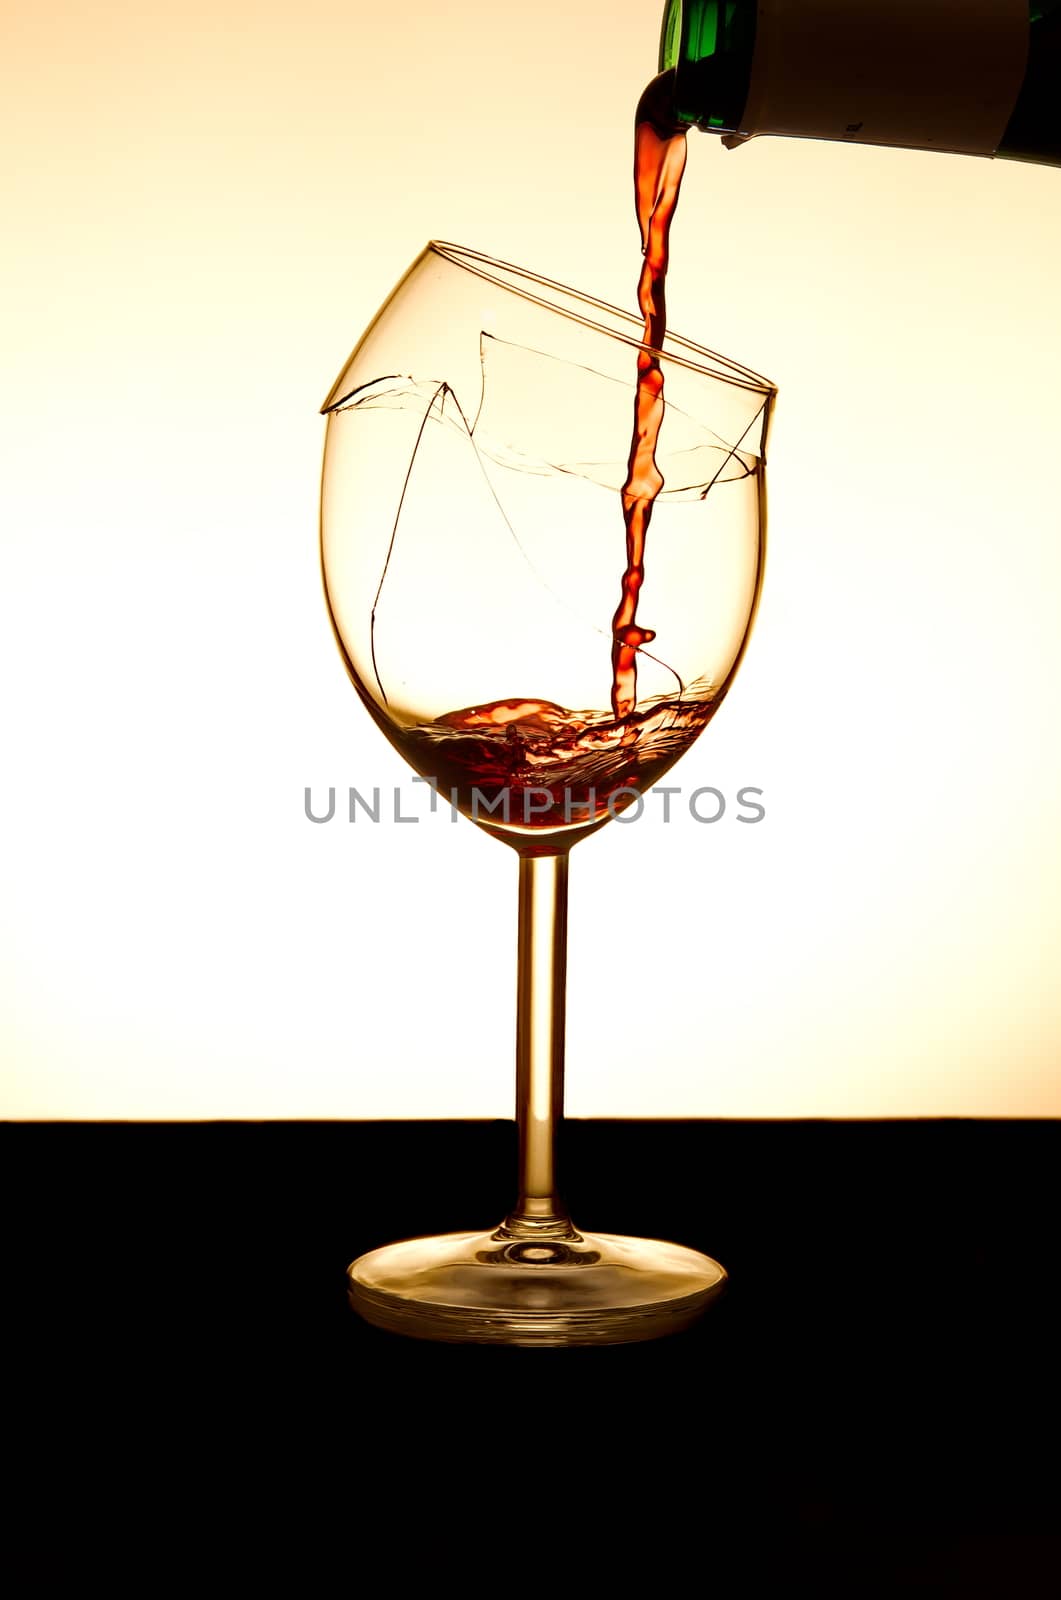 Pouring red vine into a broken glass